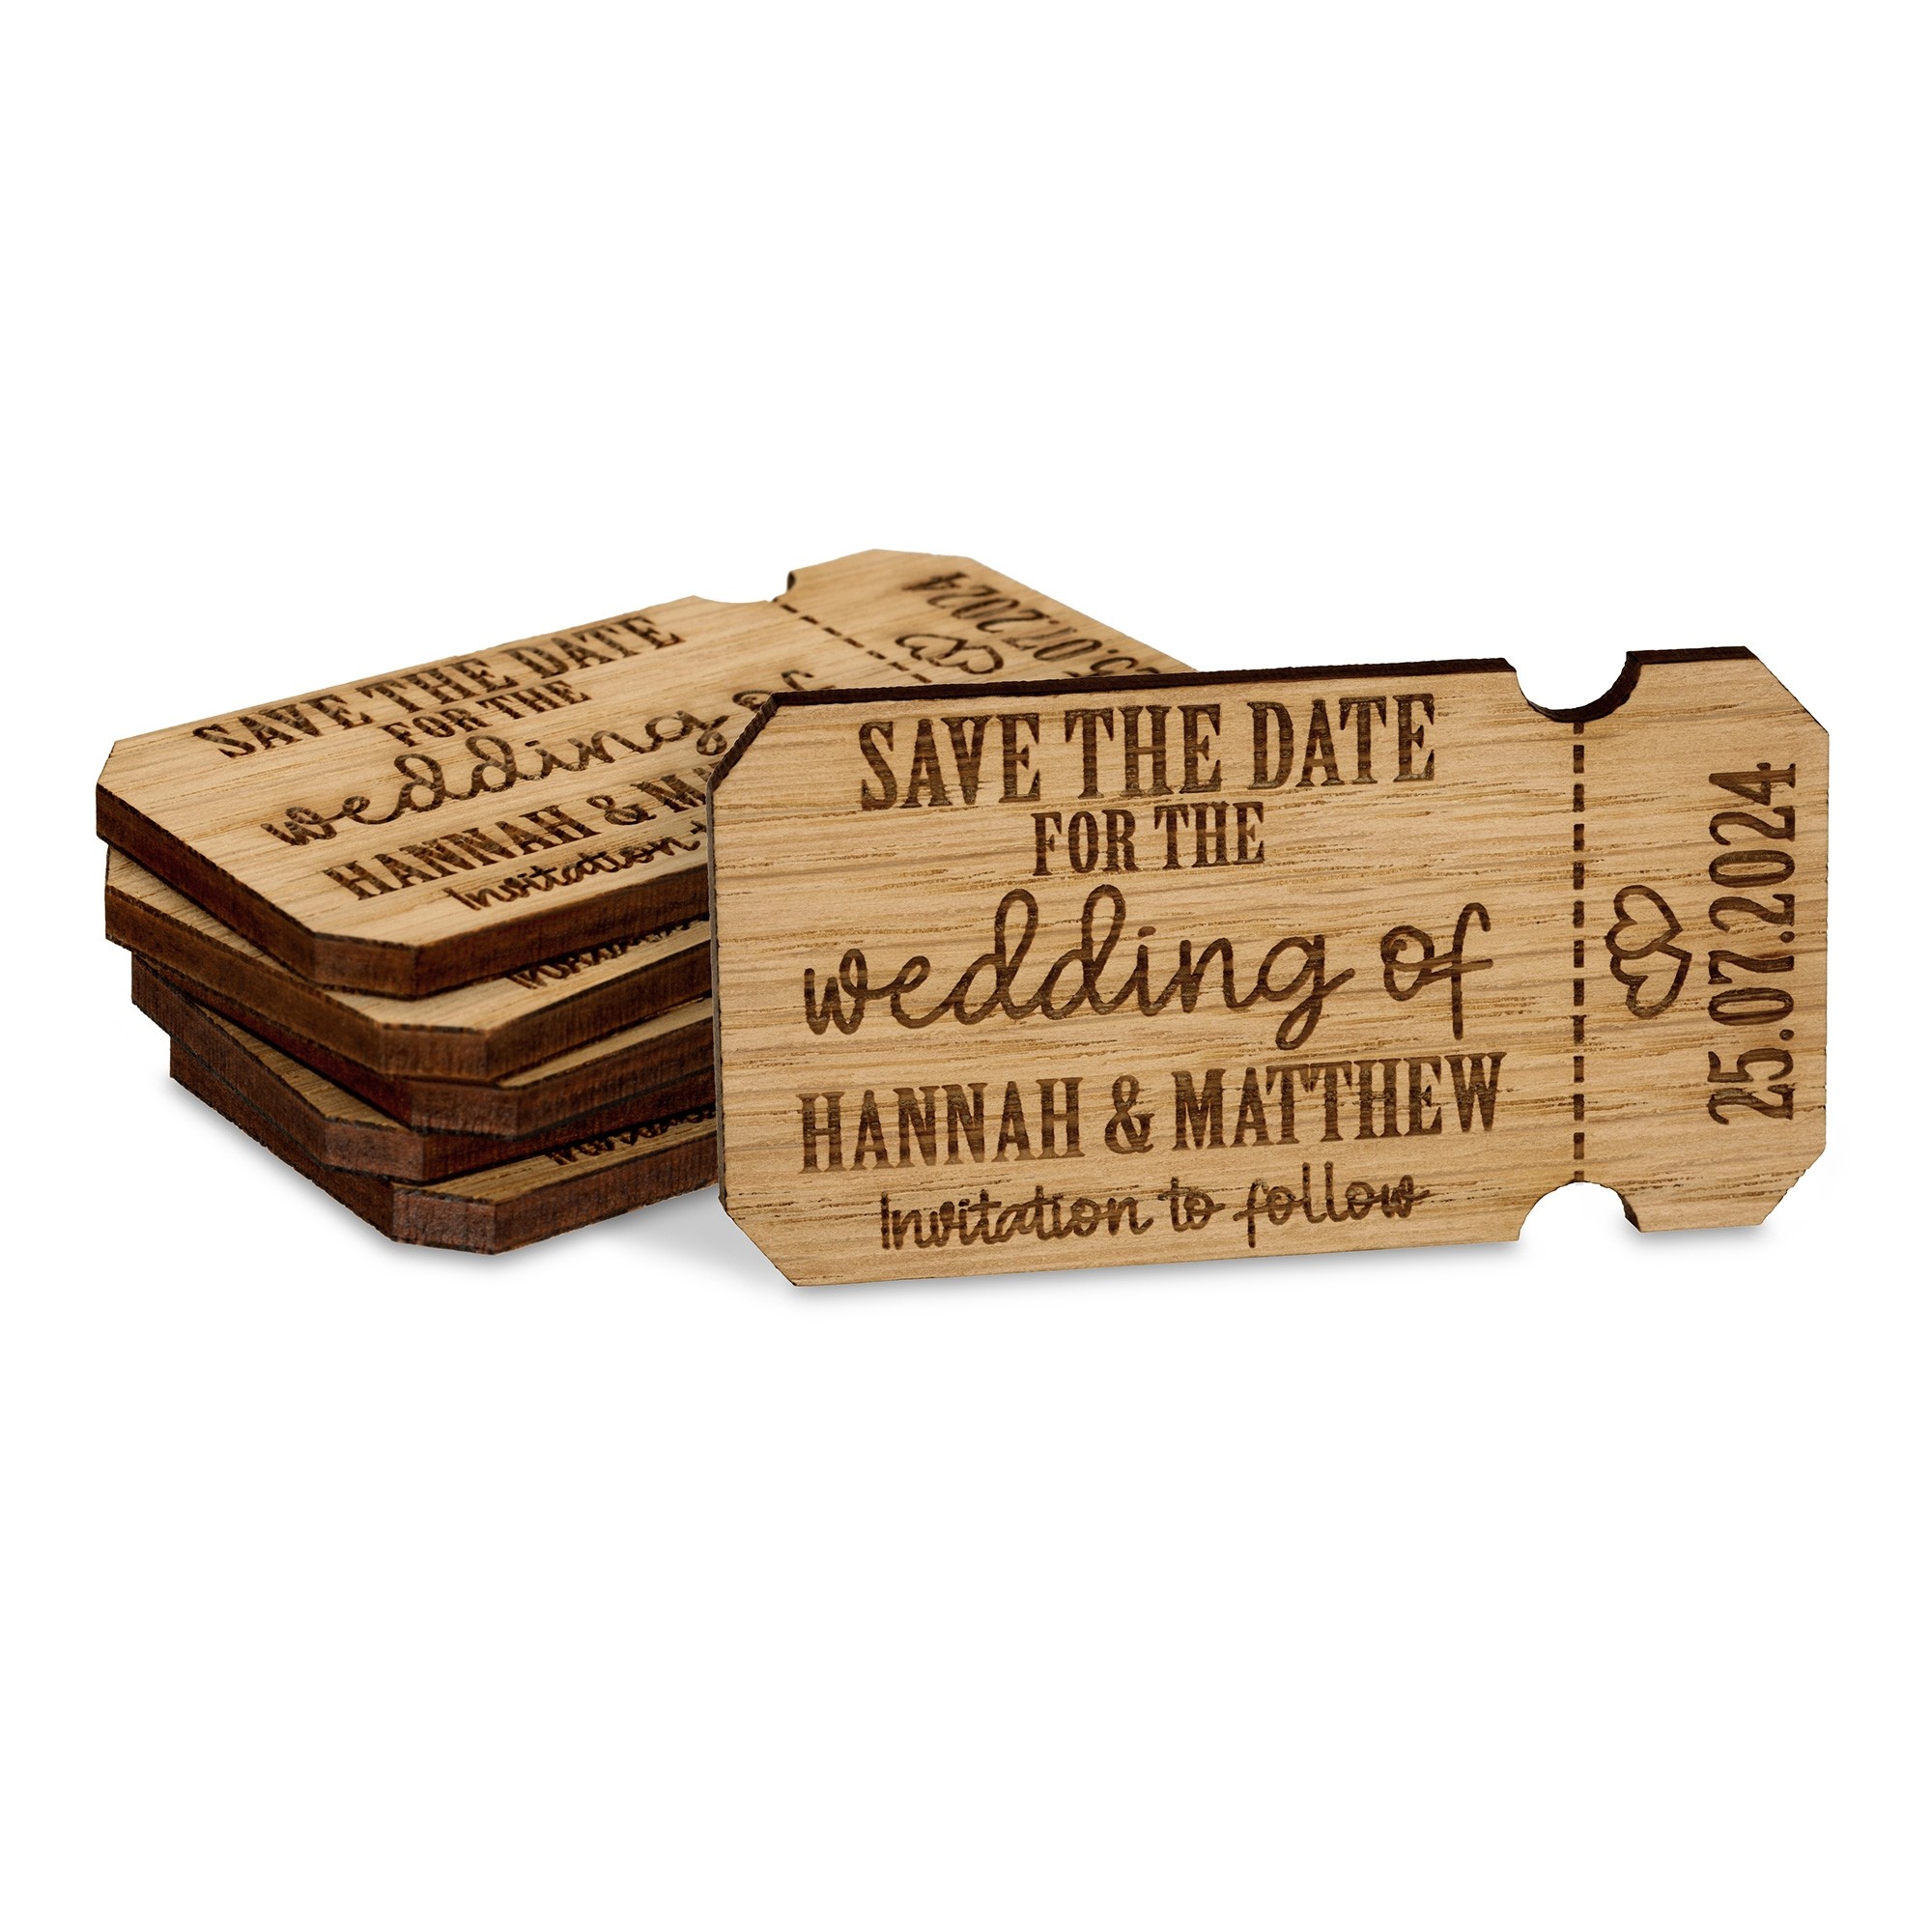 Personalised Wedding Save The Date or Evening Invitations Fridge Magnets Cards Ticket Envelopes Wooden Favours Charms Rustic Oak Custom